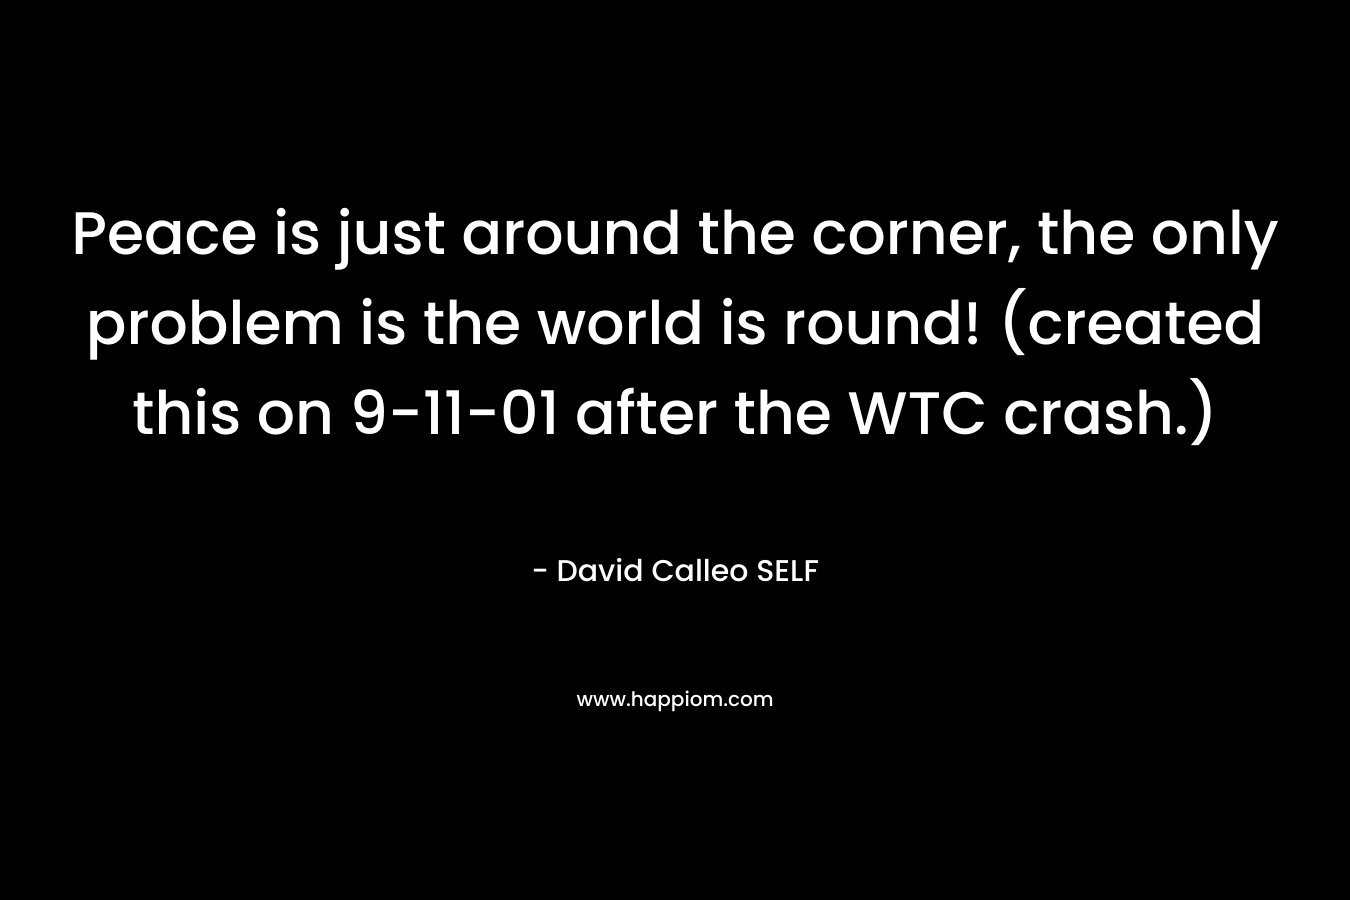 Peace is just around the corner, the only problem is the world is round! (created this on 9-11-01 after the WTC crash.) – David Calleo SELF